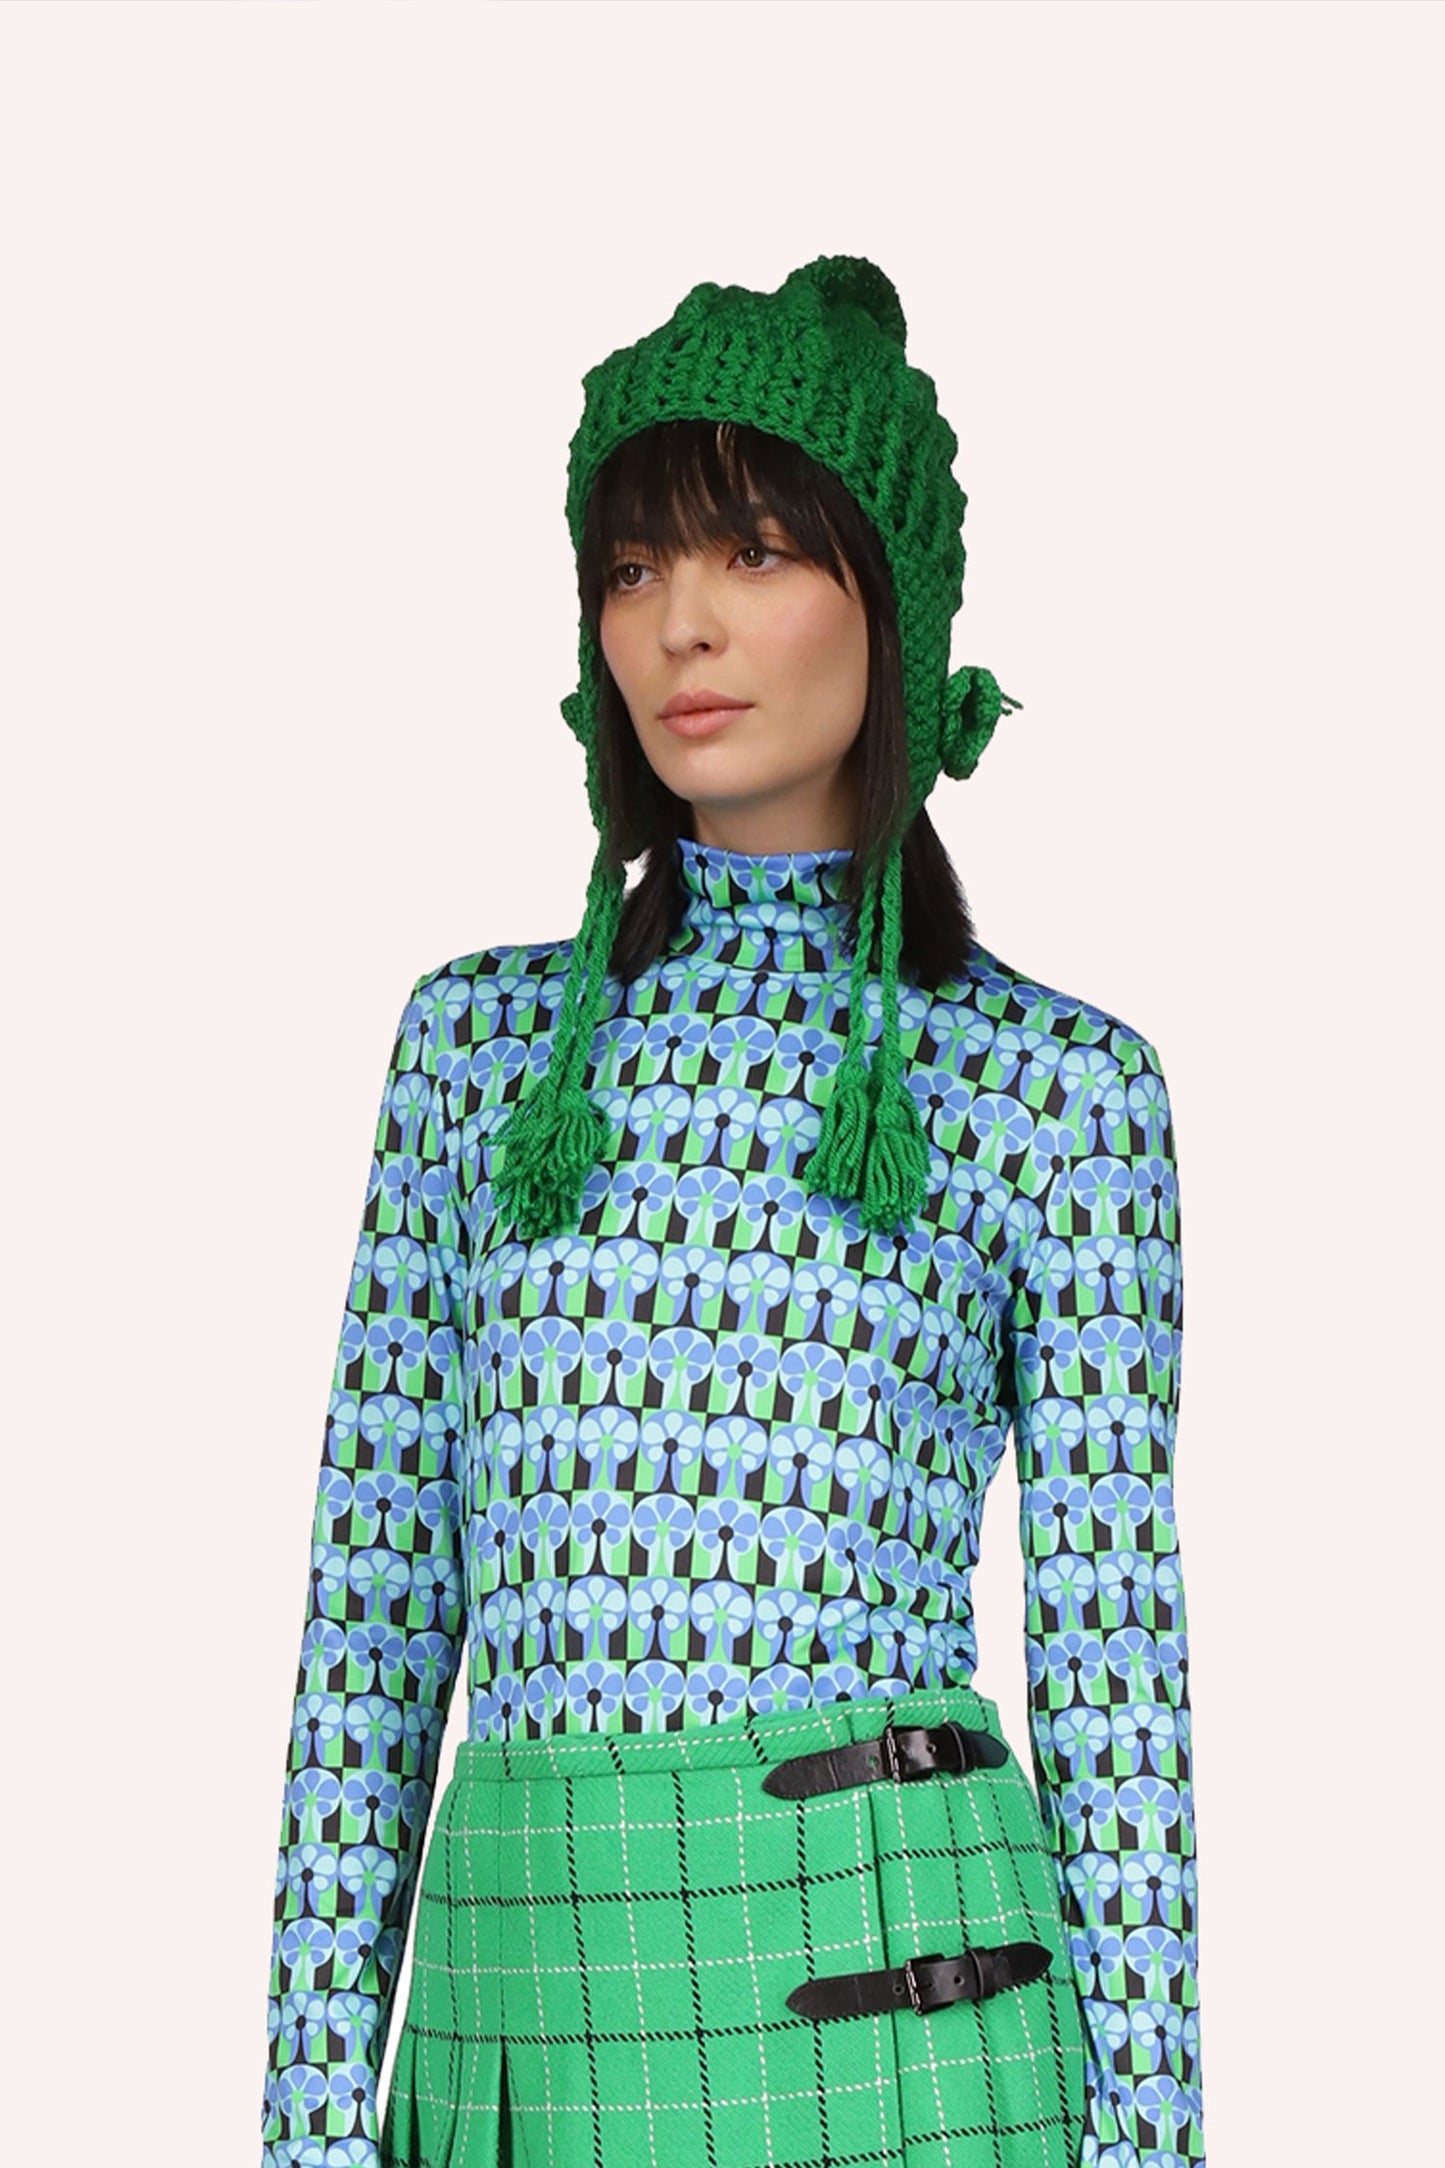 The Anna Sui Butterfly Crochet Hat in clover, the hat will be a perfect accessory